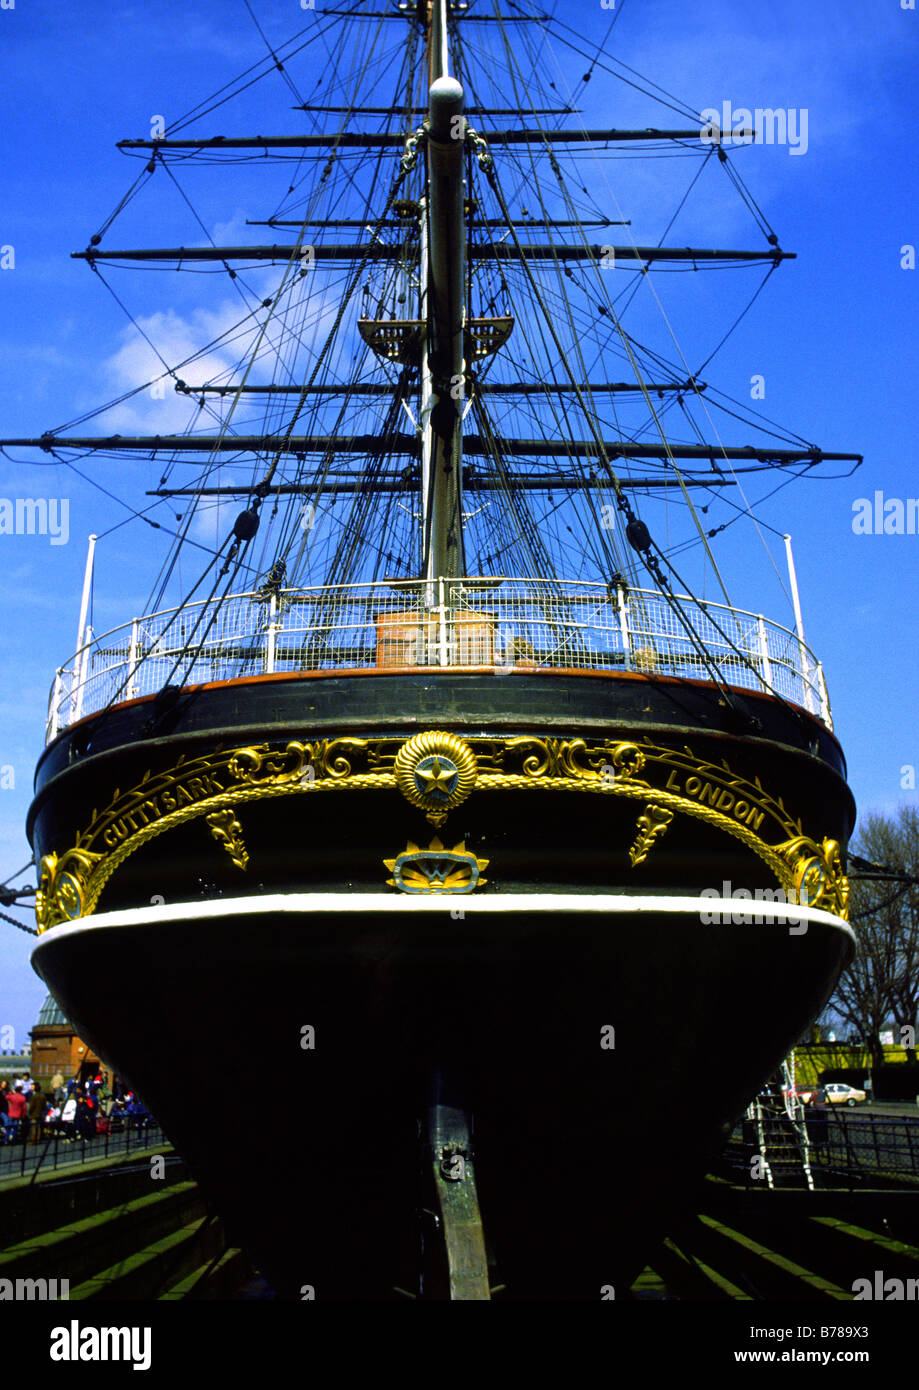 The historic tall ship Cutty Sark on display in Greenwich, London, England, UK Stock Photo